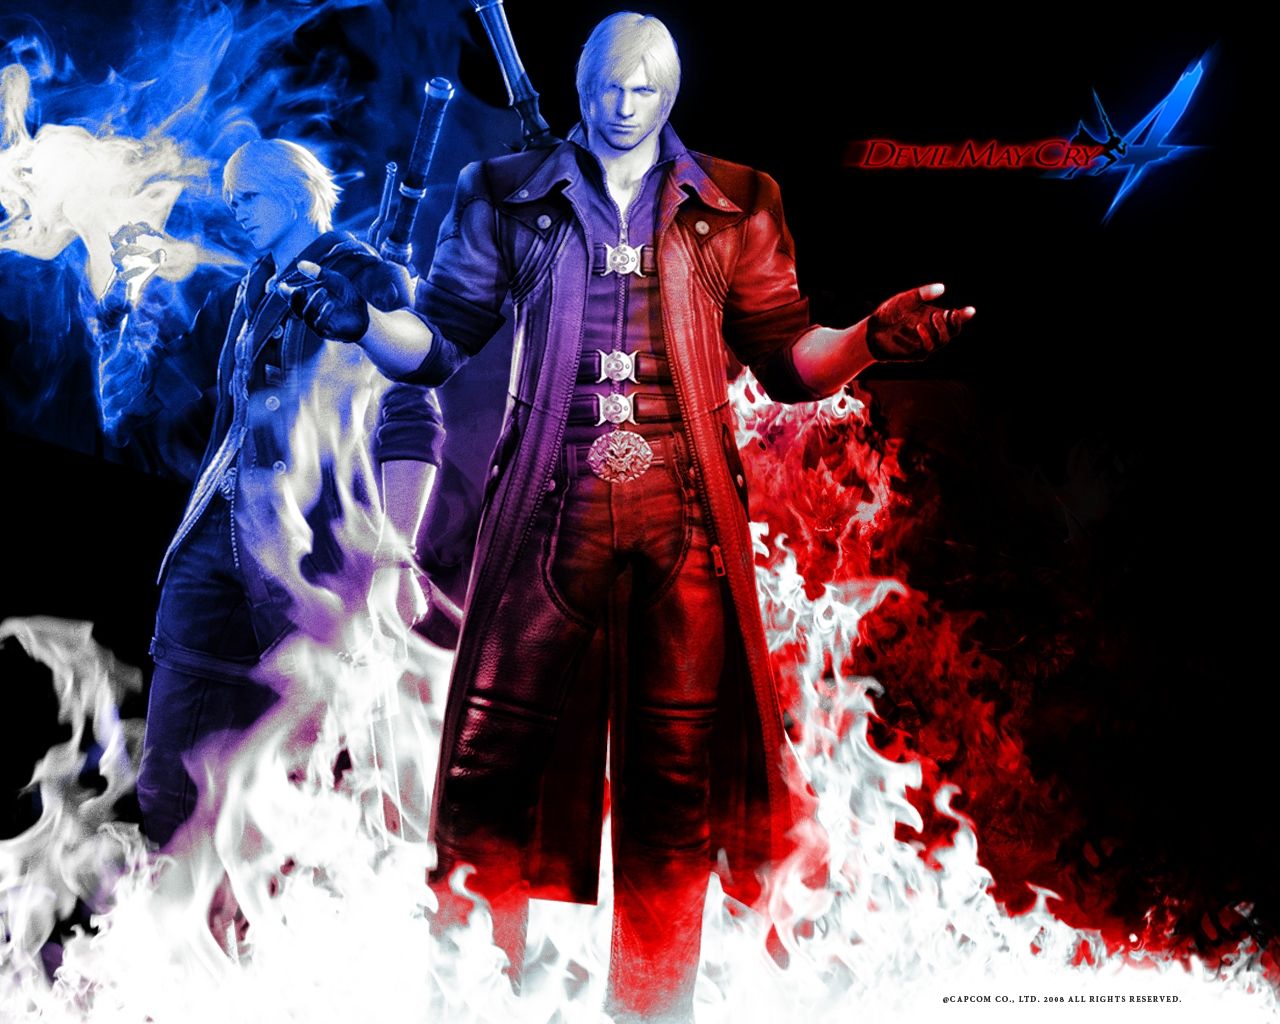 Free Devil May Cry 4 Wallpapers Wallpapers - HD Wallpapers 57179